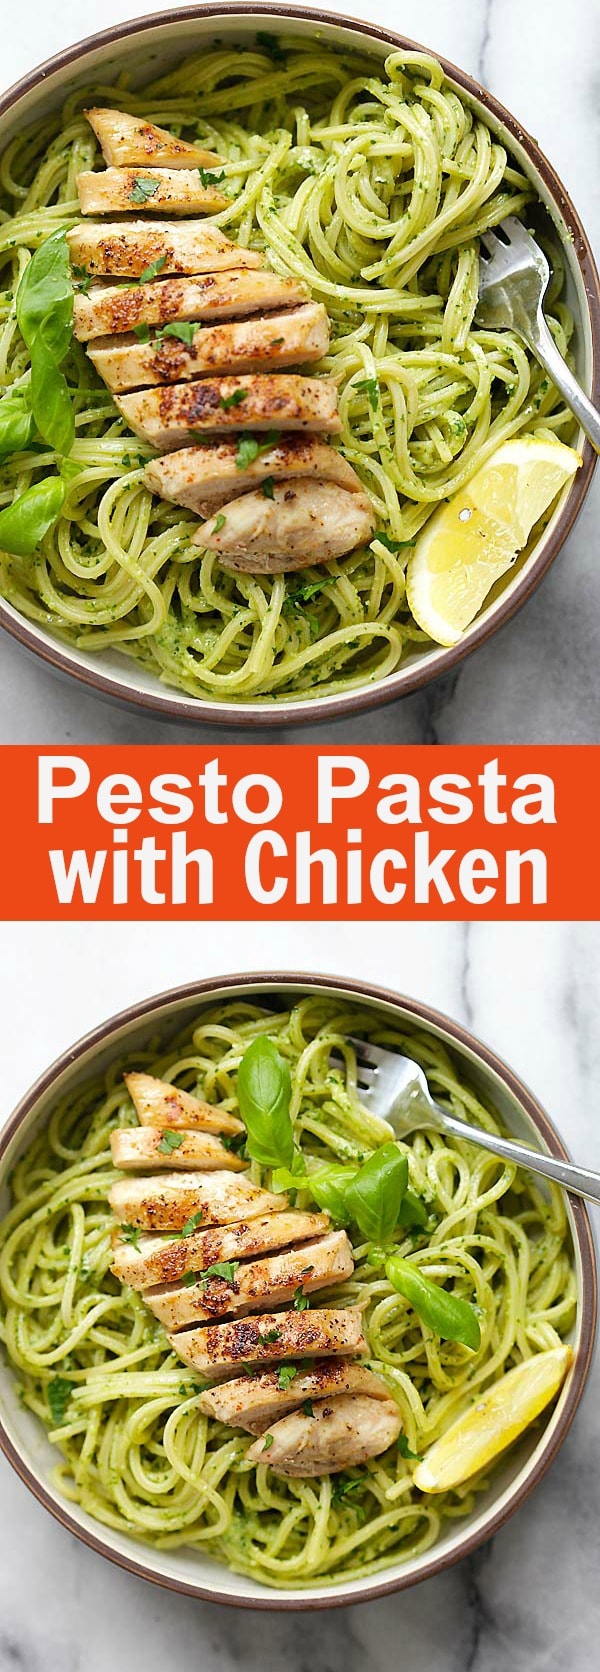 Pesto Pasta with Chicken – easy pasta with basil pesto and grilled chicken. Loaded with yogurt and Parmesan cheese, this recipe is so delicious | rasamalaysia.com